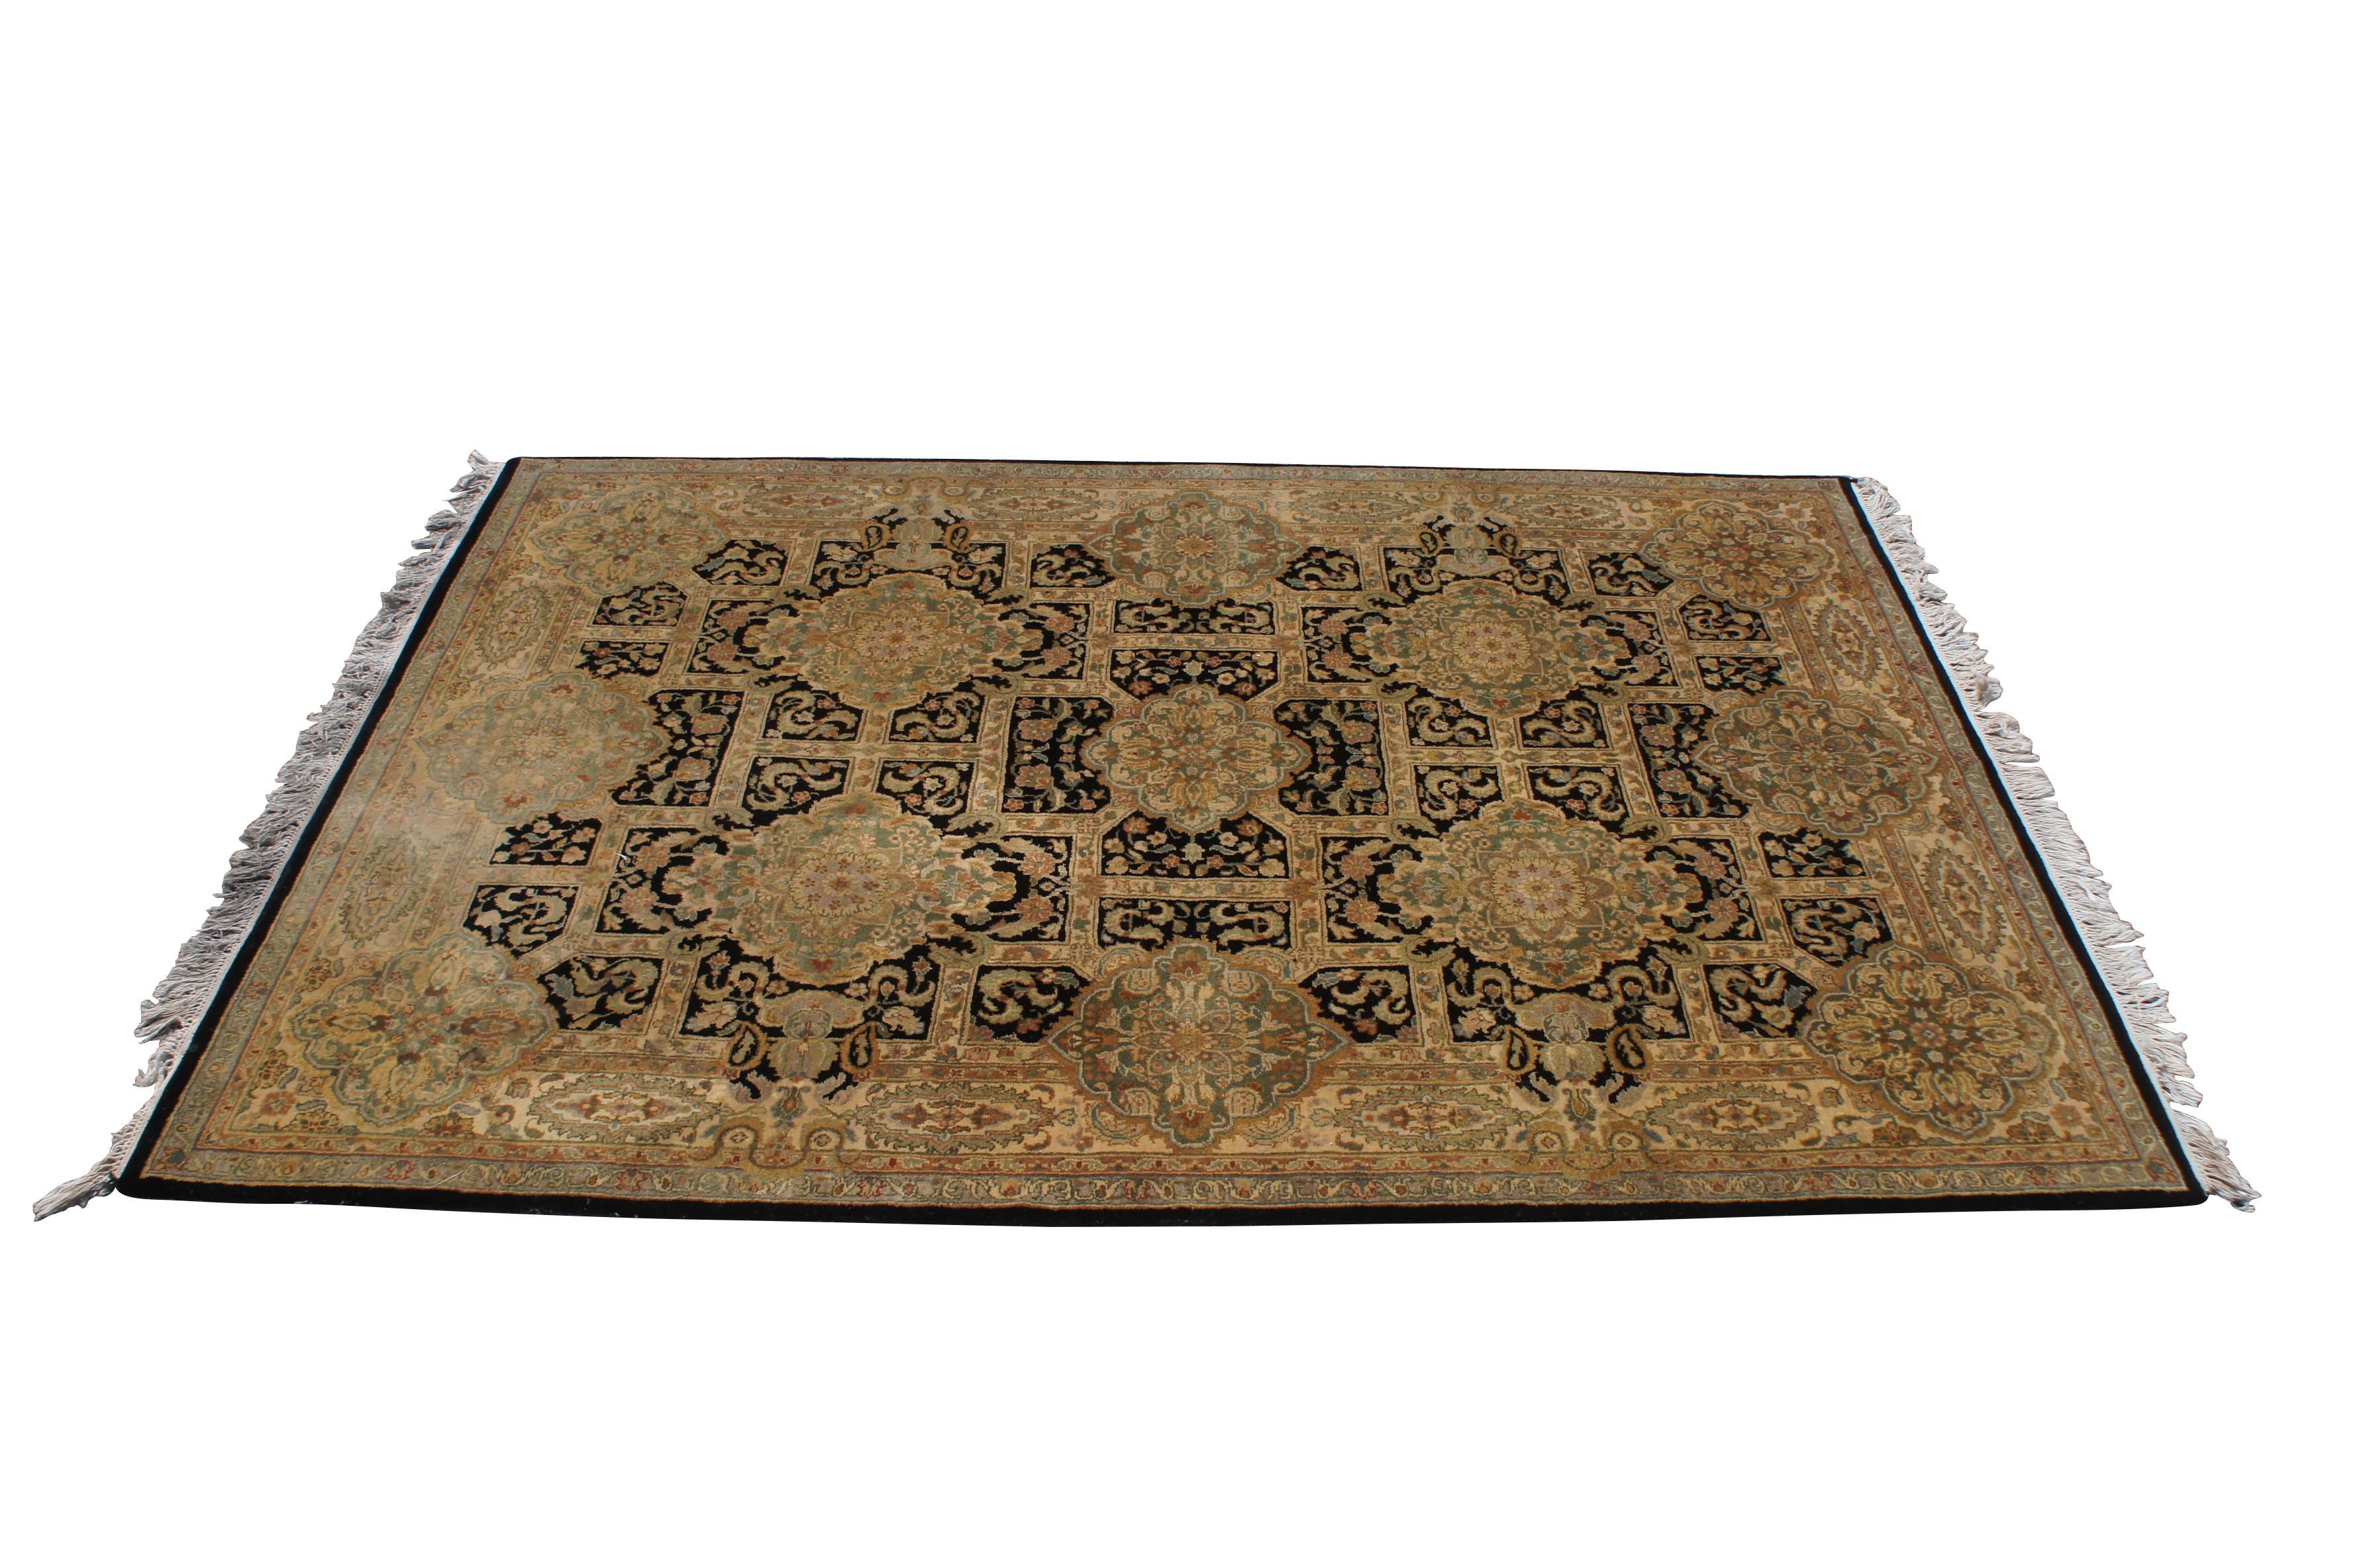 Genuine Oriental area rug, made in India.  Hand knotted in Jaipur.  Features a floral geometric deisgn in beige and black with some green and red/orange accents.  This intricate design is reminiscent of the ceiling of a Palace / Mahal.    144kpsi 